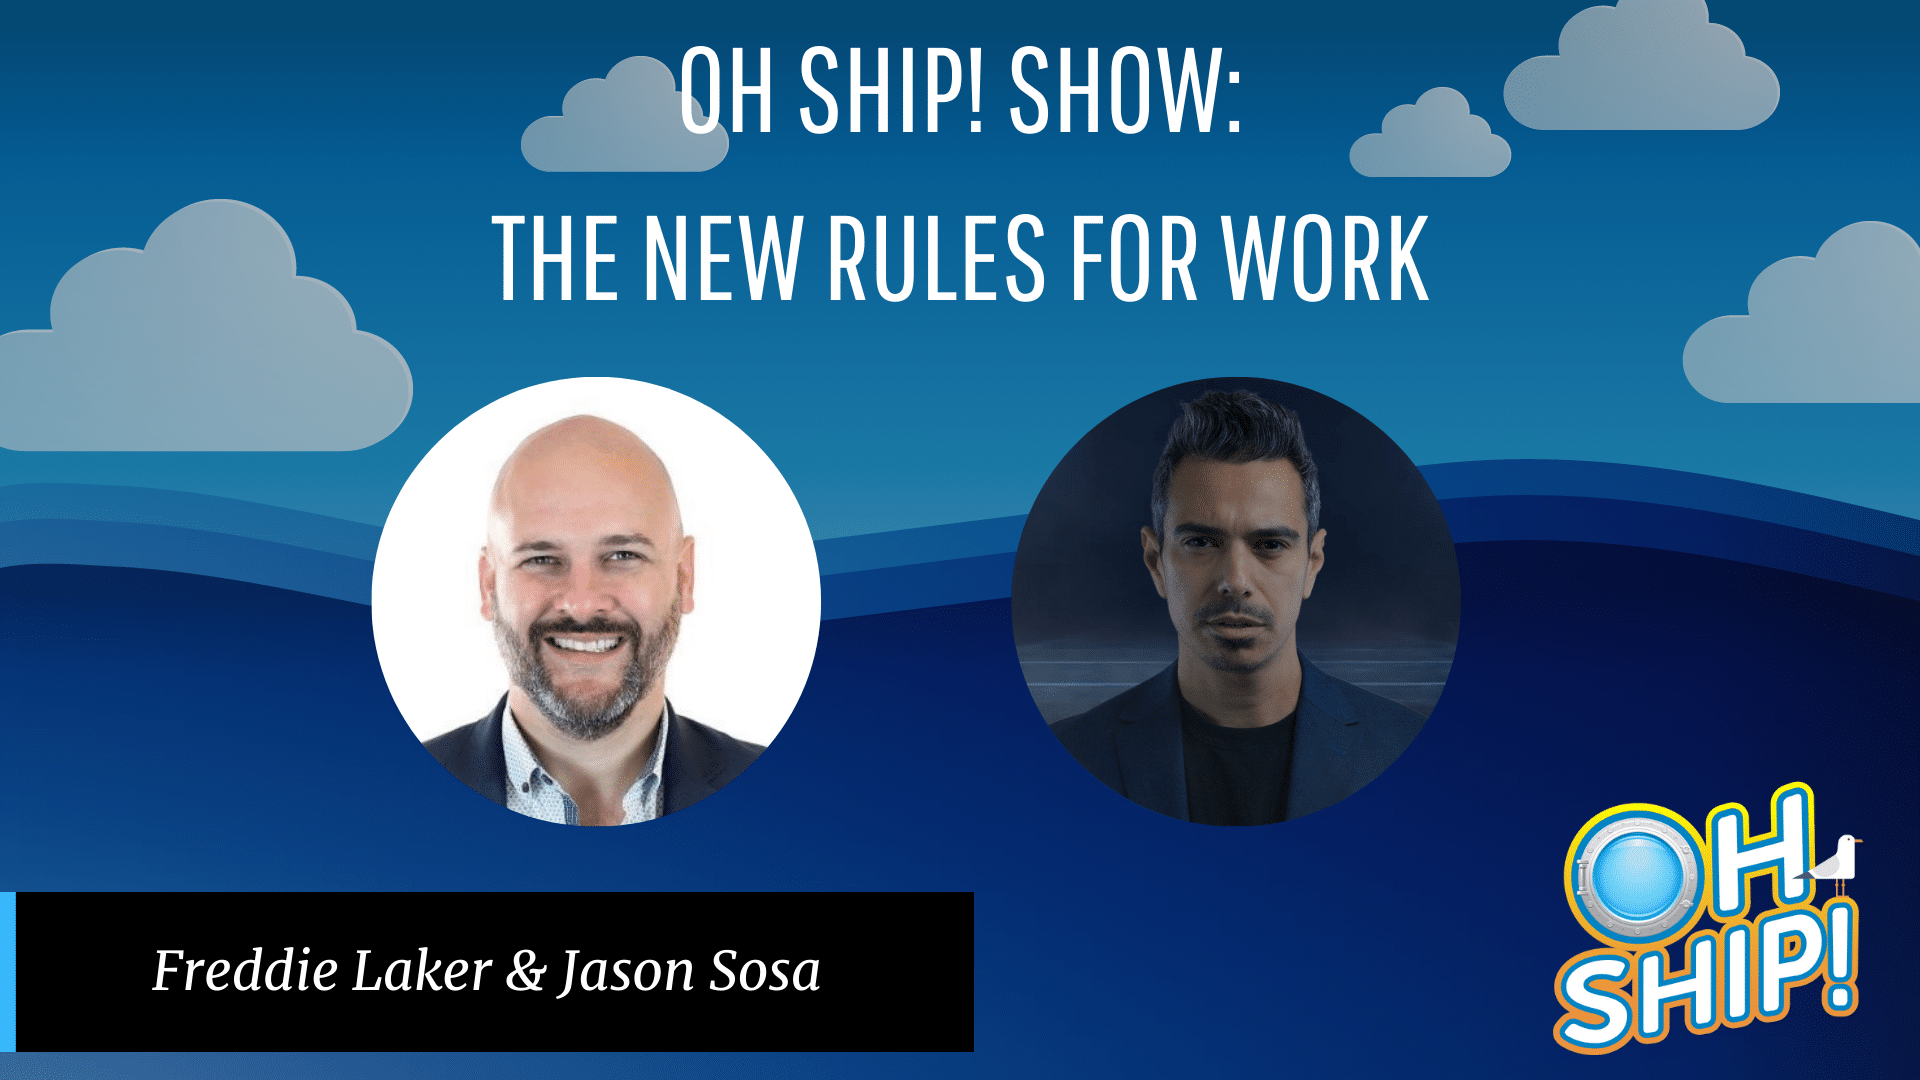 A promotional image for "Oh Ship! Show: The New Rules for Work" features photos of two men: one smiling bald man on the left, labeled "Freddie Laker," and one serious-looking thought leader on the right, labeled "Jason Sosa." The background showcases clouds and the vibrant "Oh Ship!" logo.